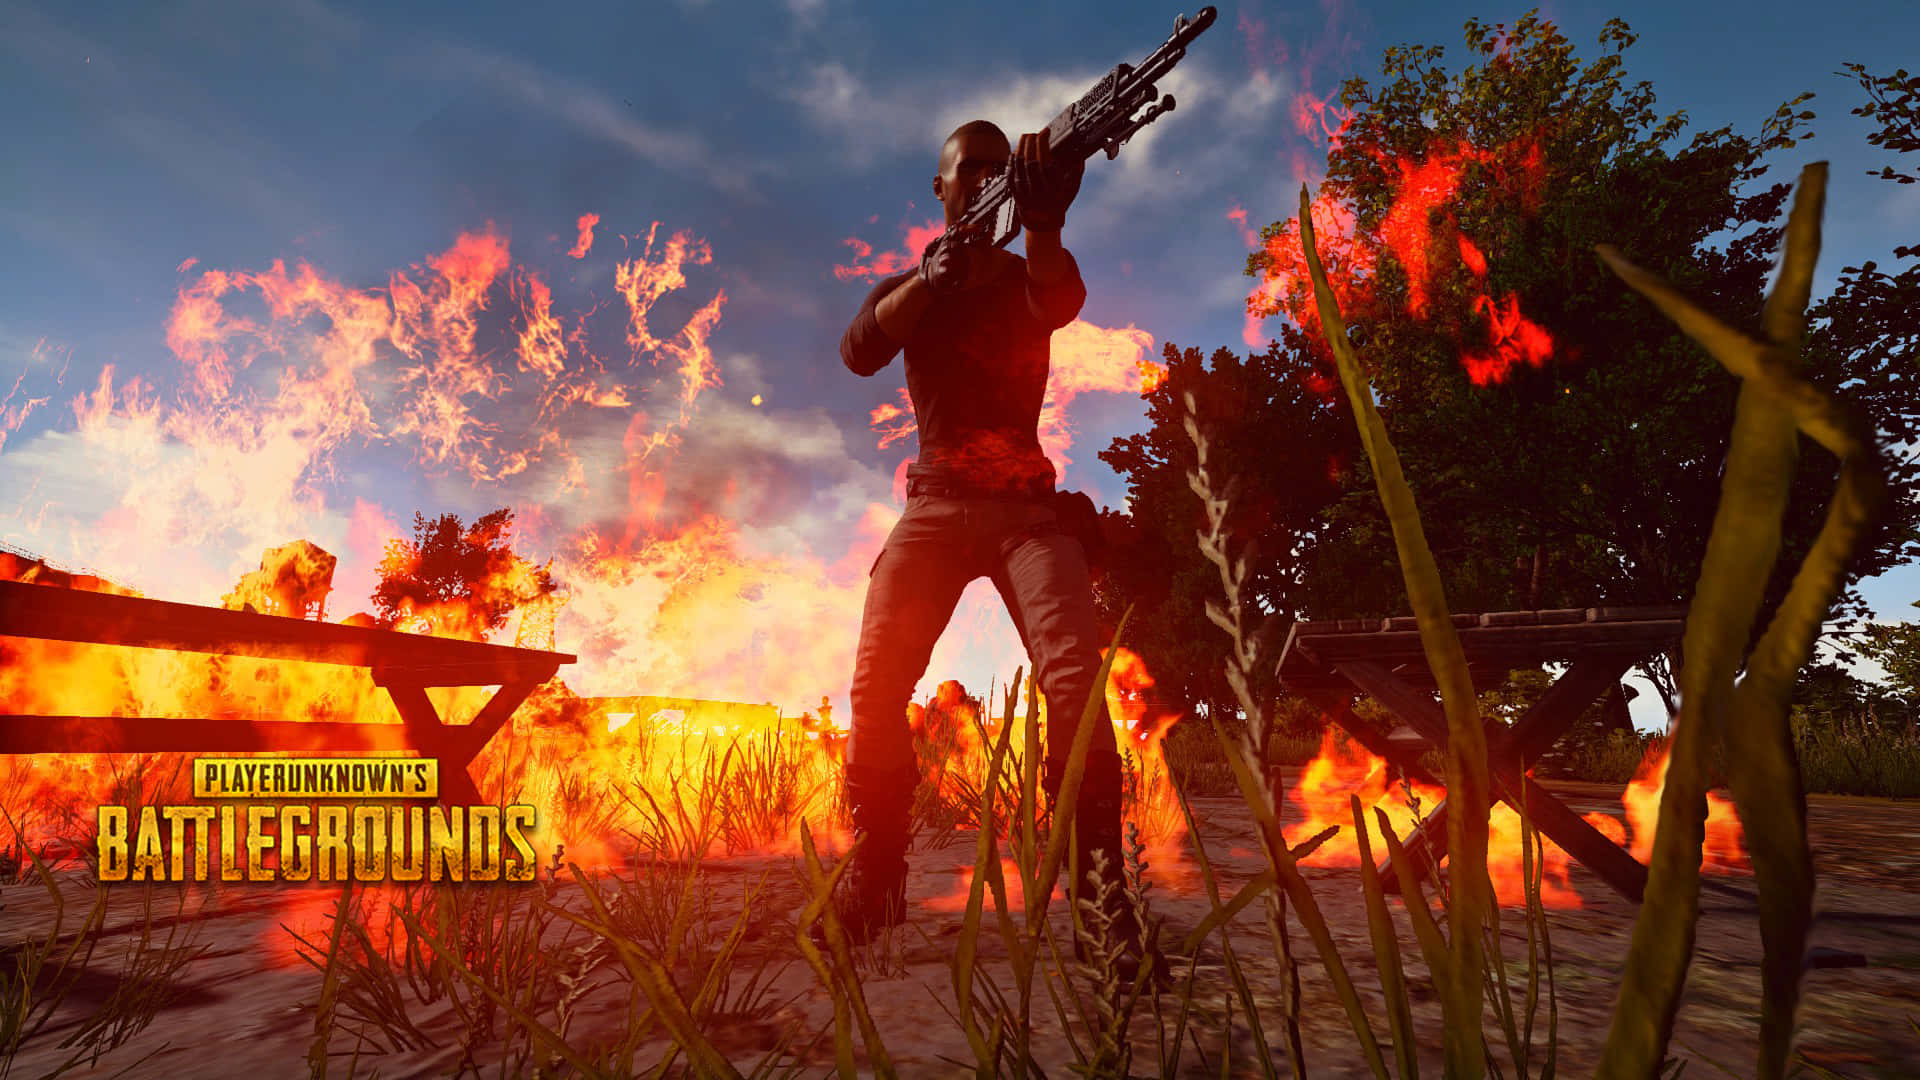 Pubg - A Man With A Gun In Front Of A Fire